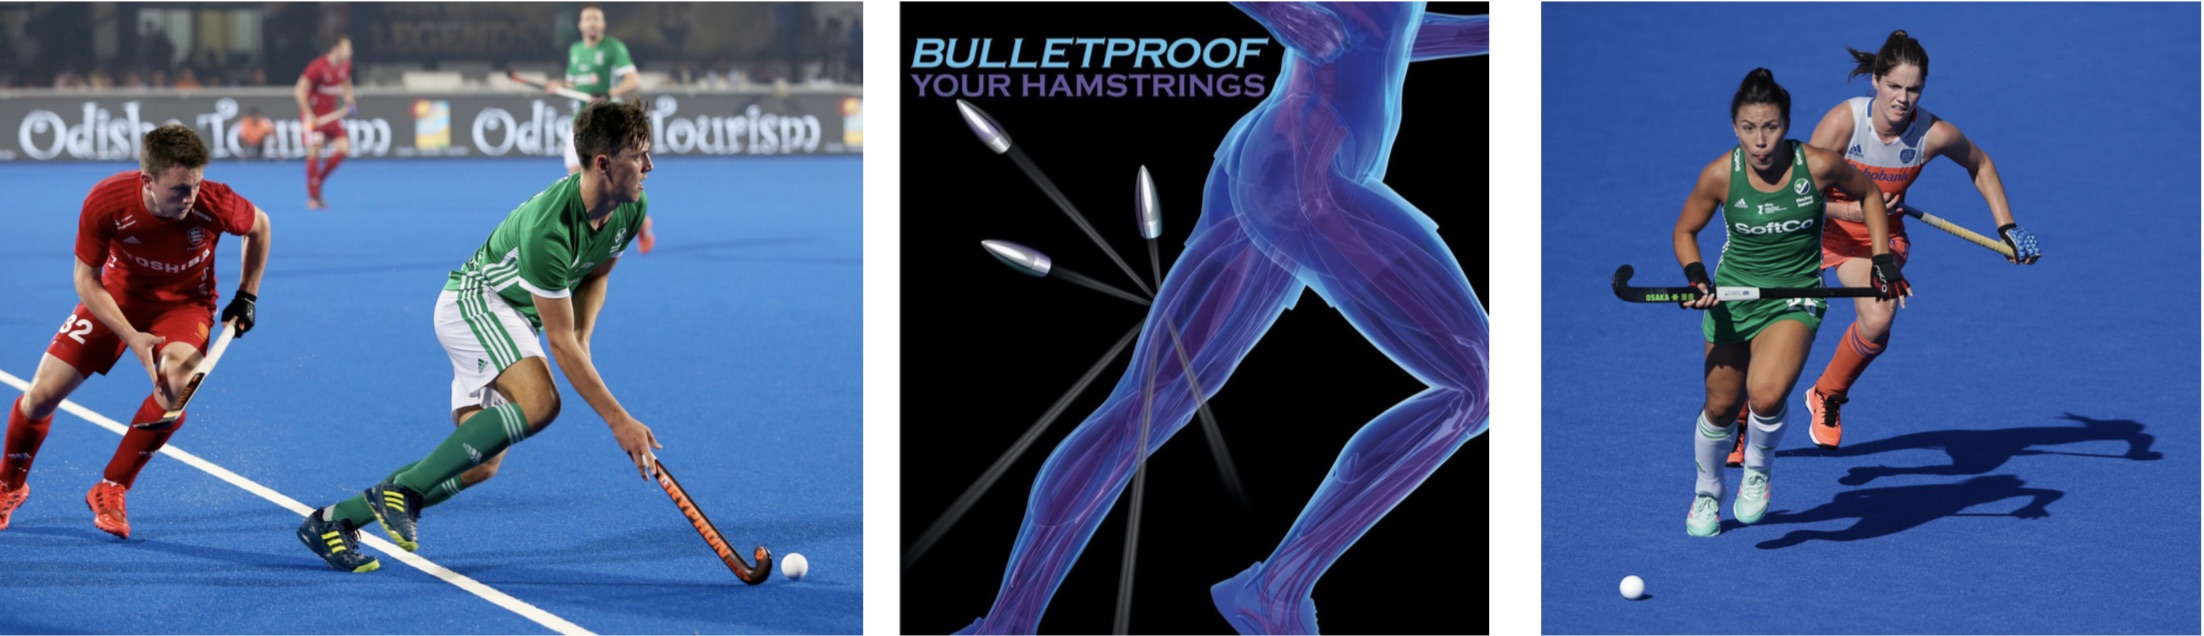 Hamstrings – Their importance and how to bulletproof them. Despite the best efforts of performance coaches, physiotherapists, doctors and players to maintain hockey‐specific physical conditioning during the lockdown, many players may show detraining signs, resulting in an increased risk of injury upon returning to play post lockdown.